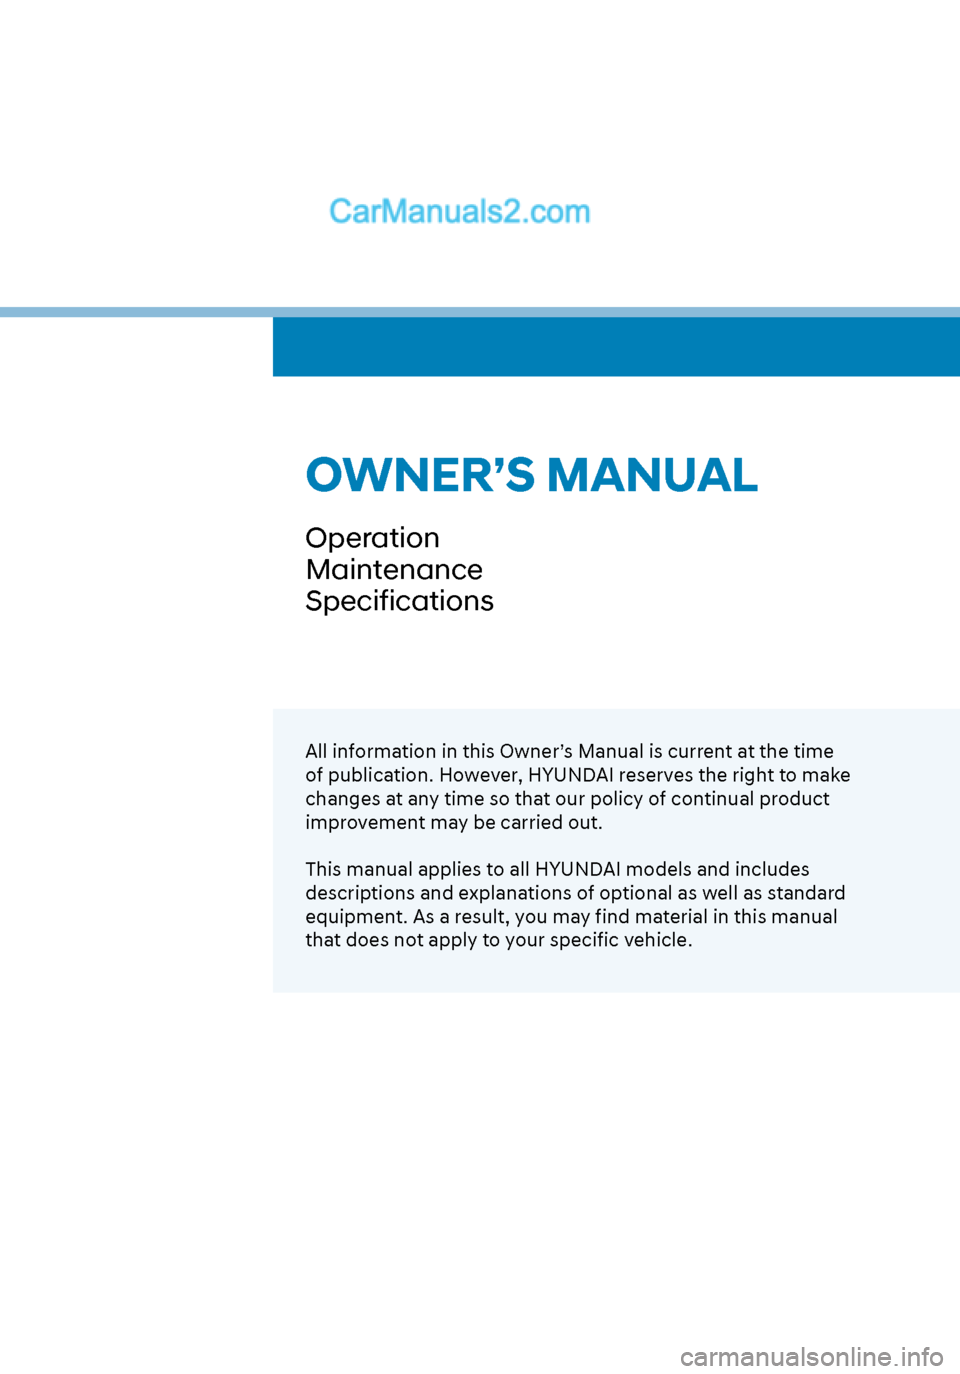 Hyundai Sonata 2020  Owners Manual OWNER’S MANUAL
Operation
Maintenance
Specifications
All information in this Owner’s Manual is current at the time 
of publication. However, HYUNDAI reserves the right to make 
changes at any time 